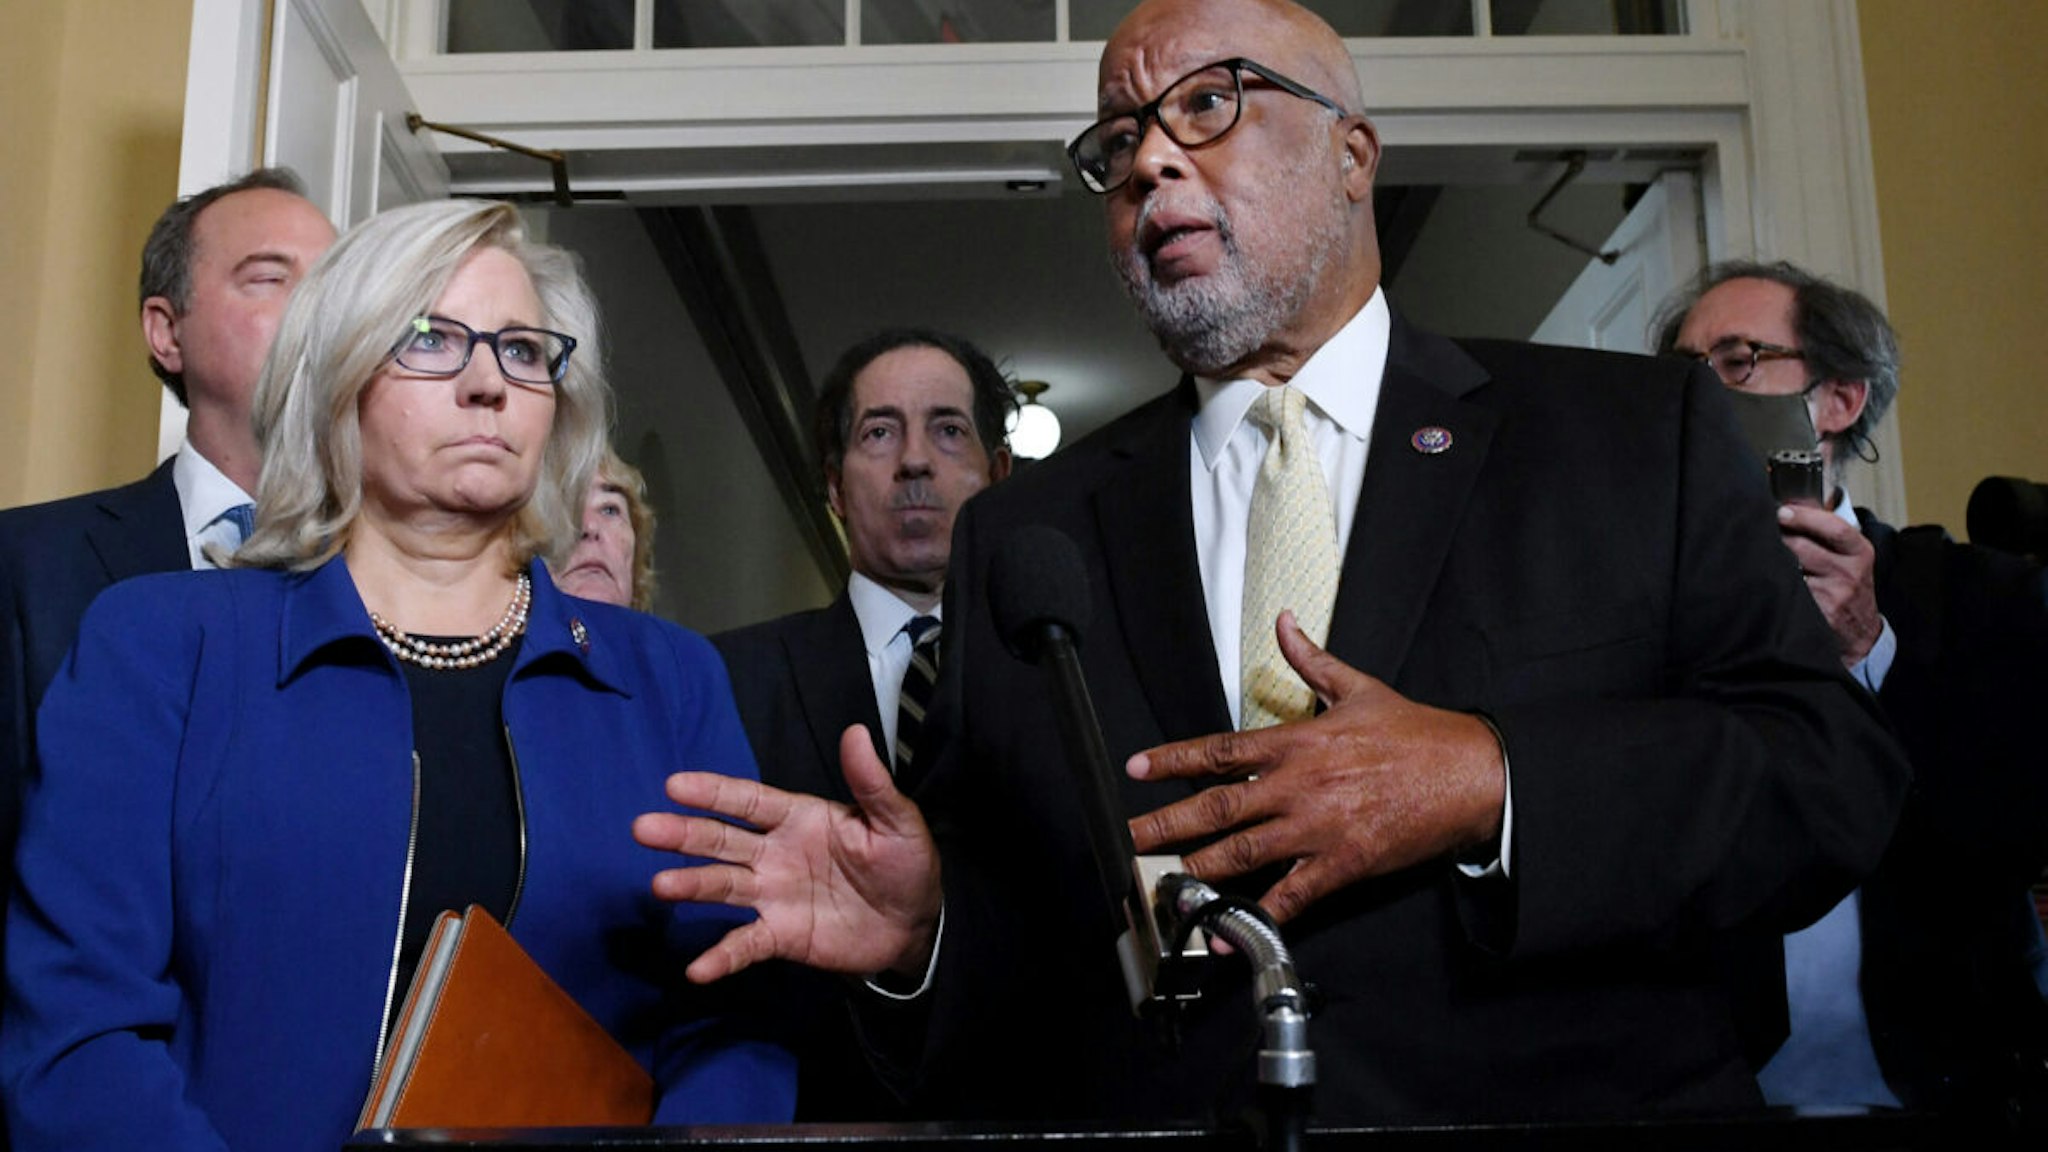 Chairman Rep. Bennie Thompson, D-MS next to Rep. Liz Cheney, R-WY, and flanked by other members of Congress,speaks to the media following testimony during the Select Committee to Investigate the January 6th Attack on the US Capitol adjourned their first hearing on Capitol Hill in Washington, DC, on July 27, 2021.